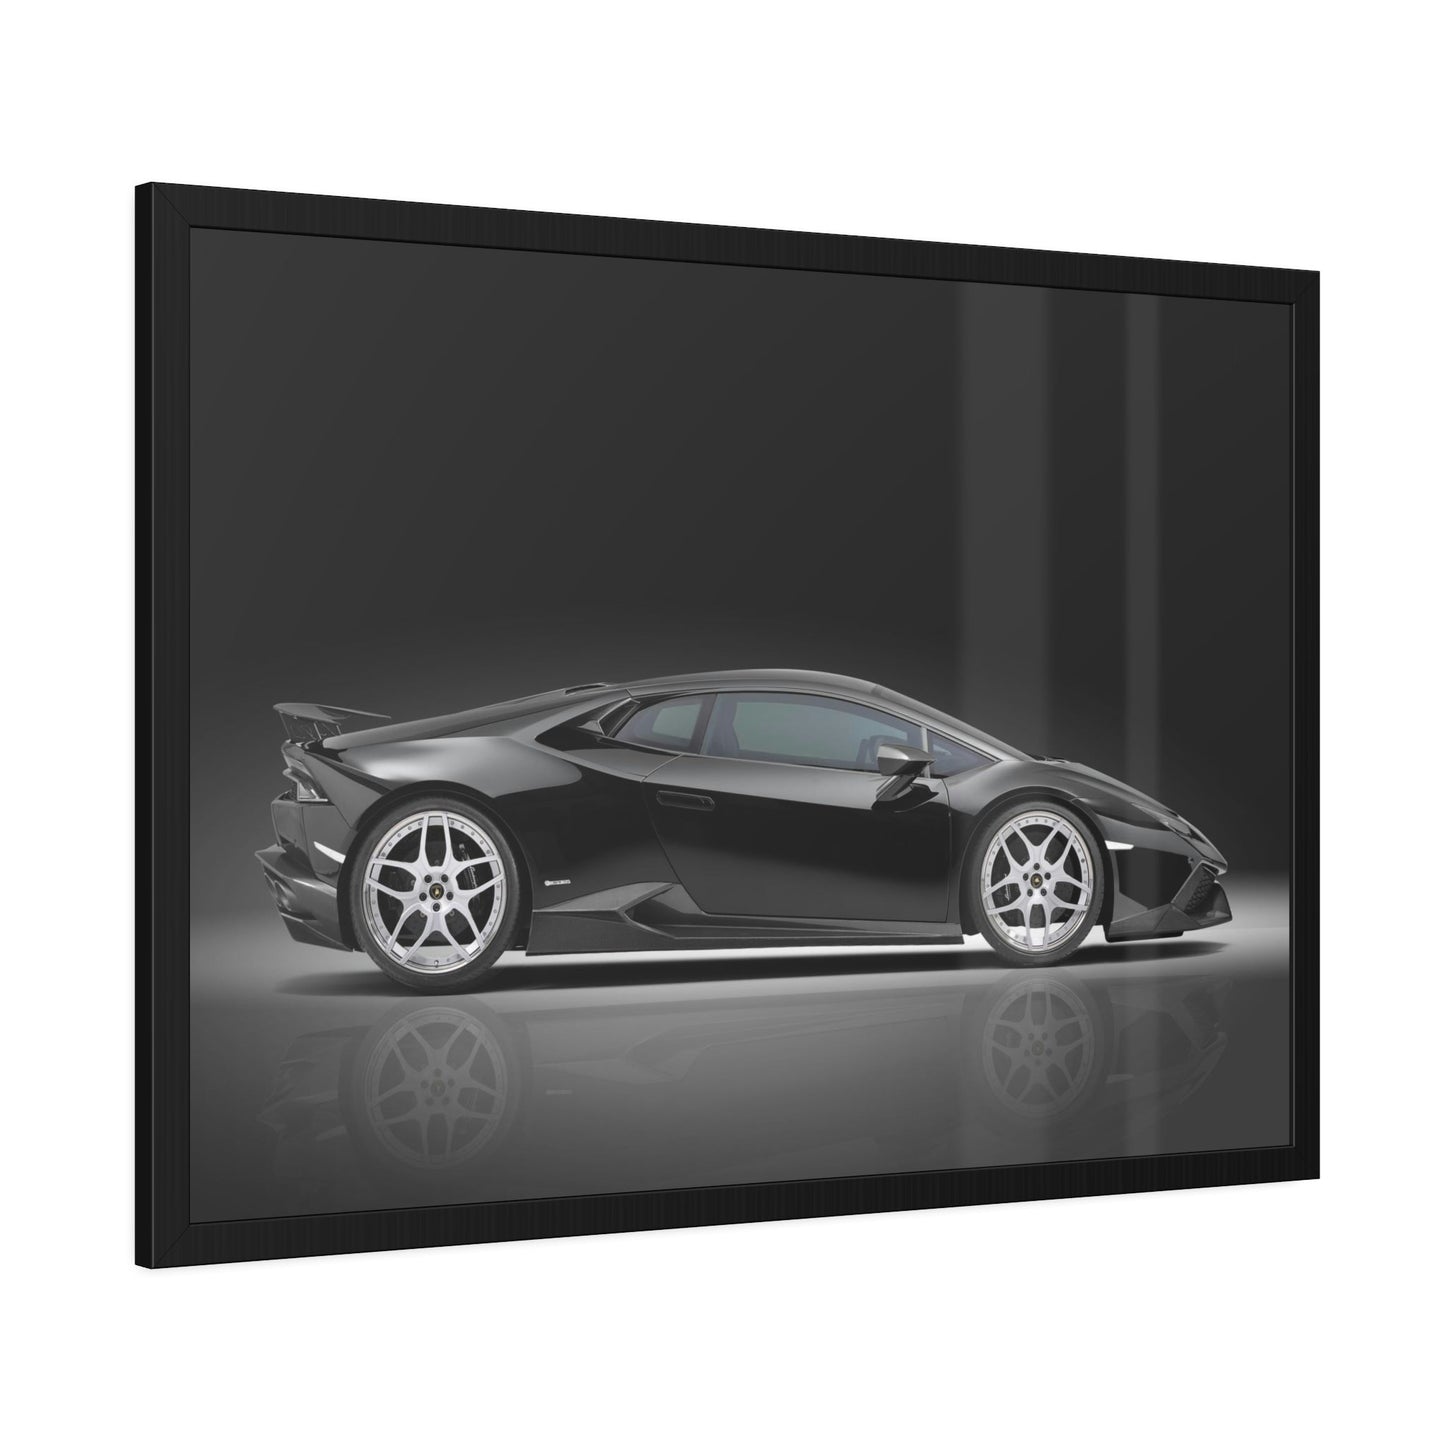 Artistic Rendering of a Lamborghini: Print on Canvas for Car Fans